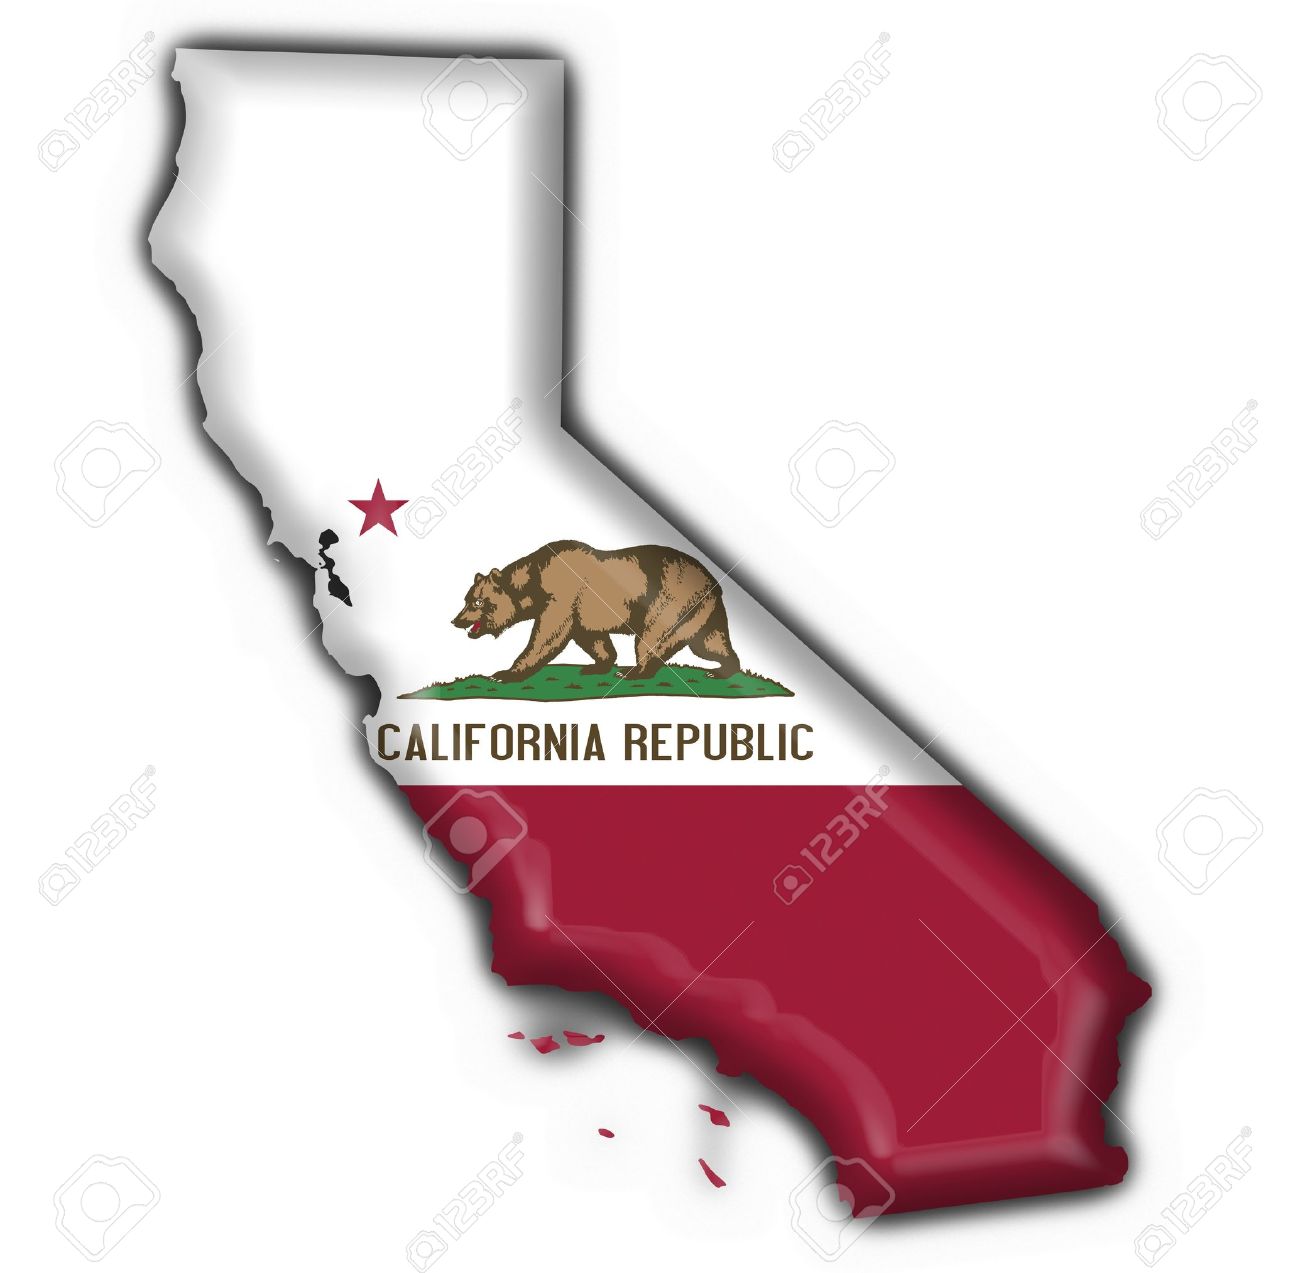 California Online Poker Bill Passes Appropriations Committee